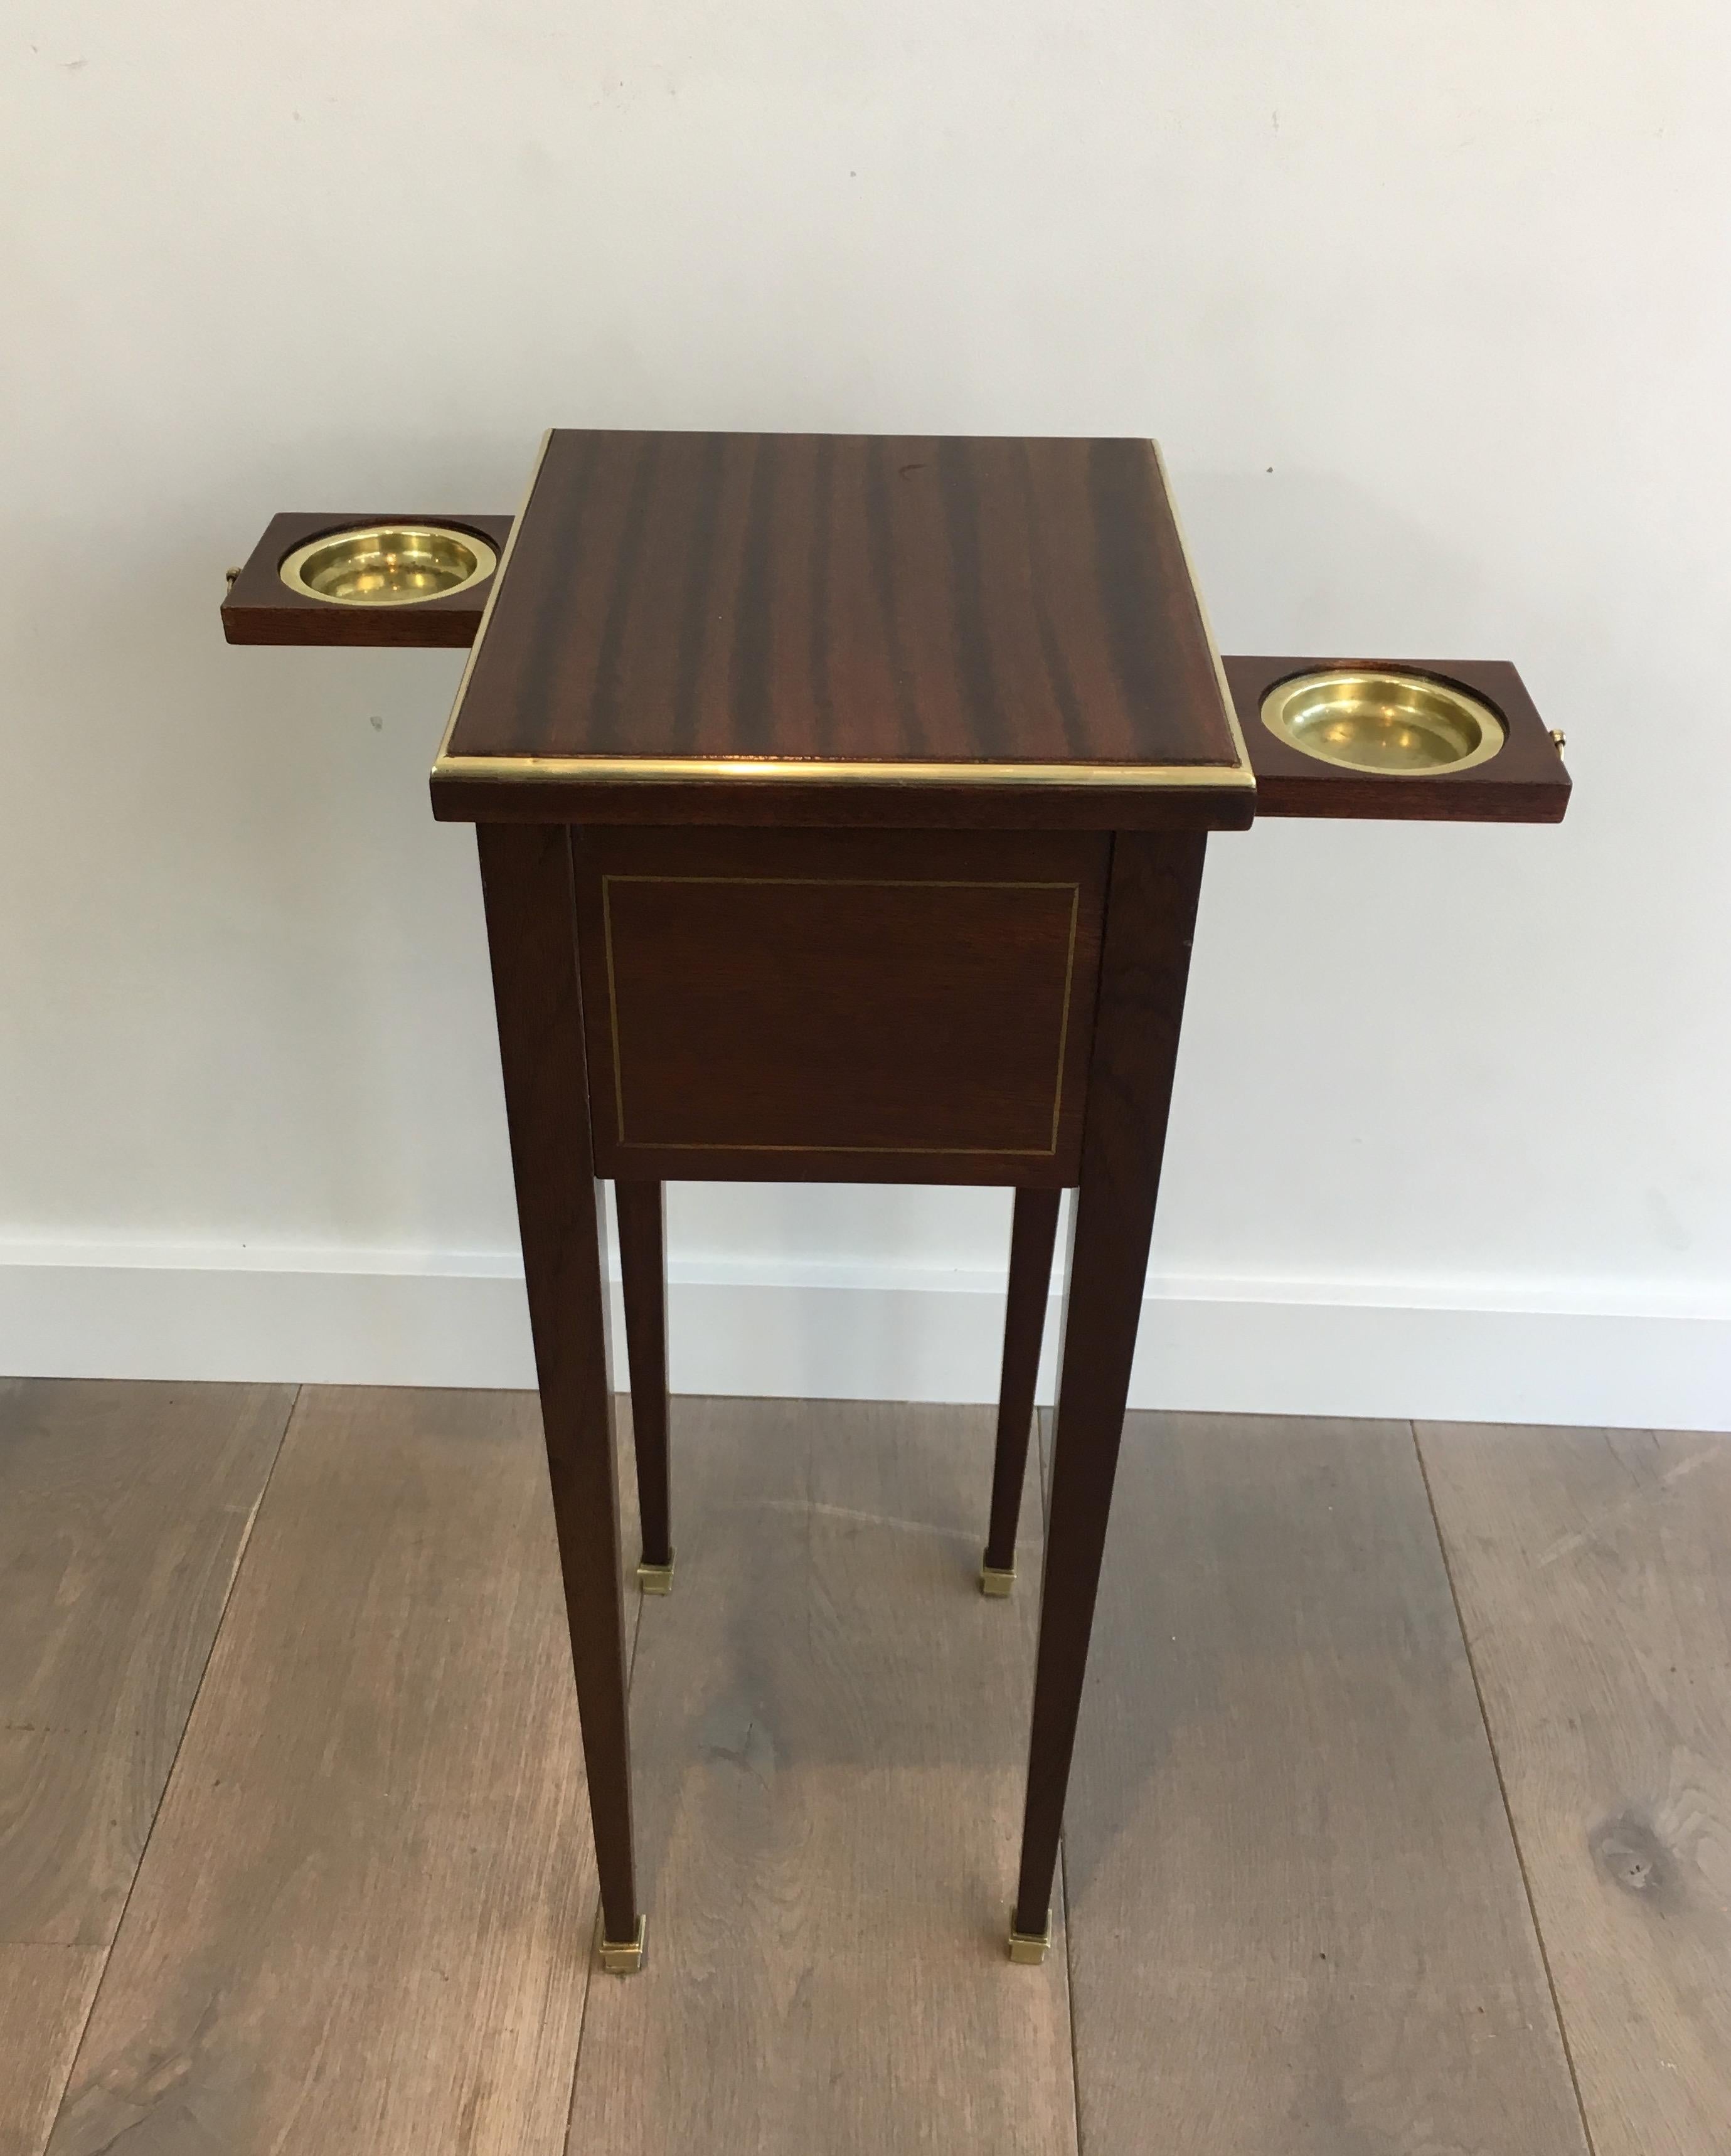 Unusual Neoclassical Small Drawers Table with Sliding Ashtrays 1